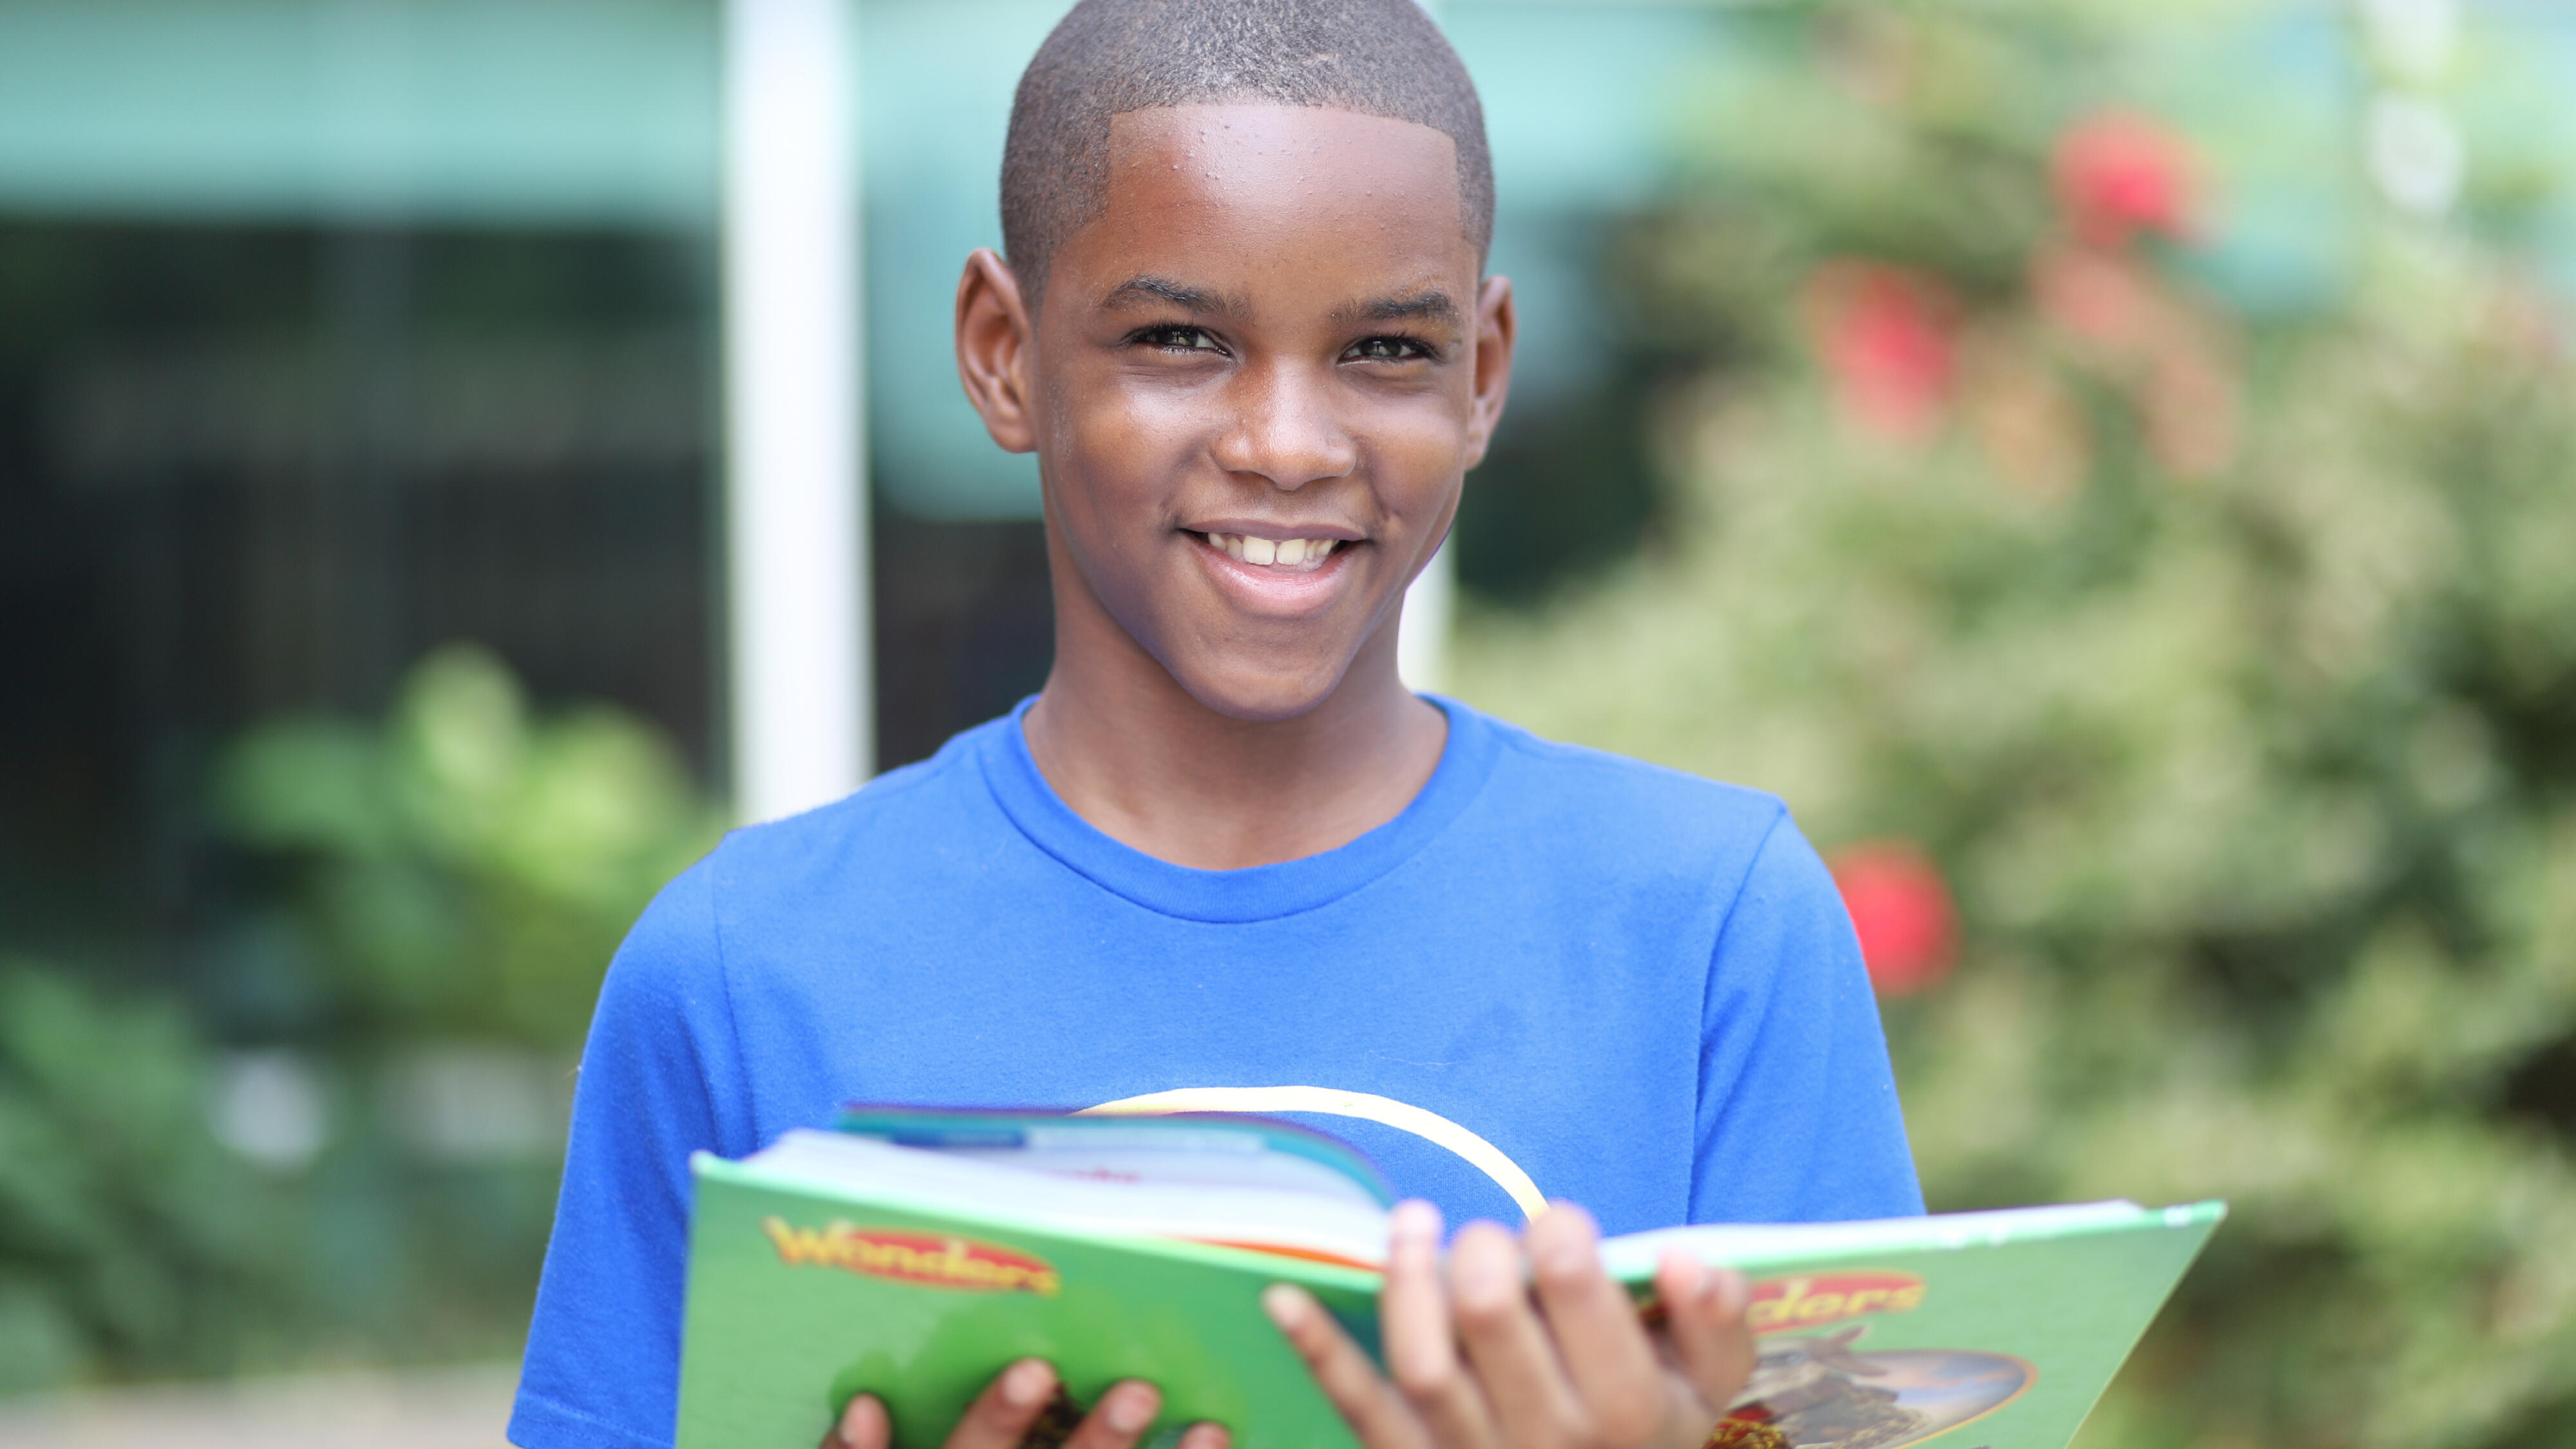 Student smiling while reading a textbook outside the school